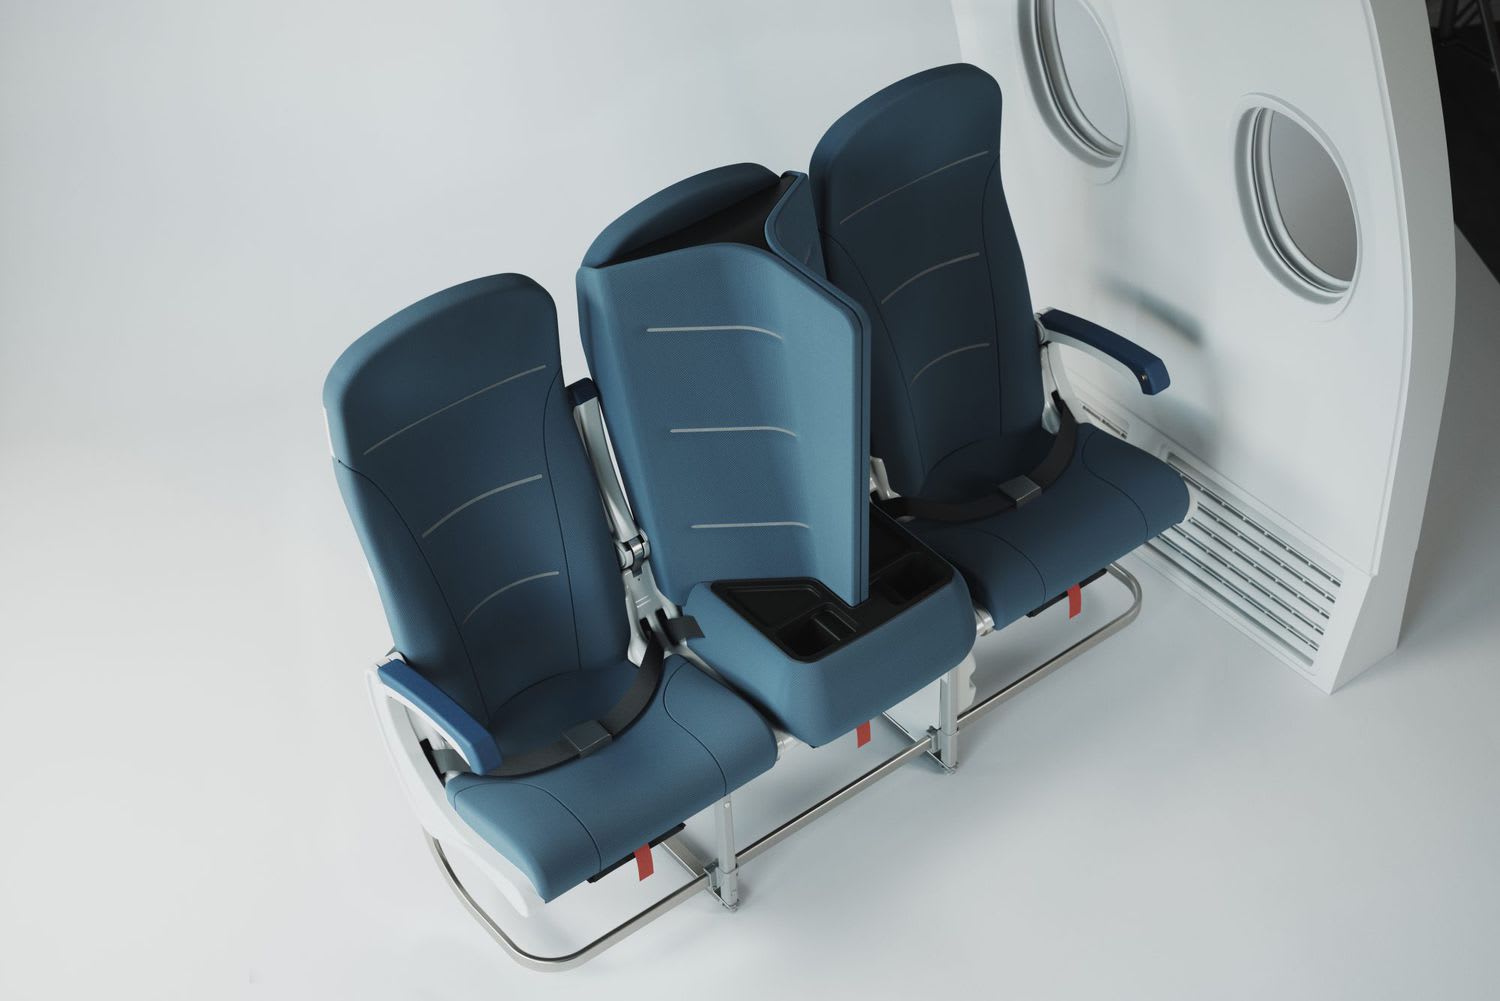 Dividers in This New Plane Seat Design Ensure Both Privacy and Social Distance